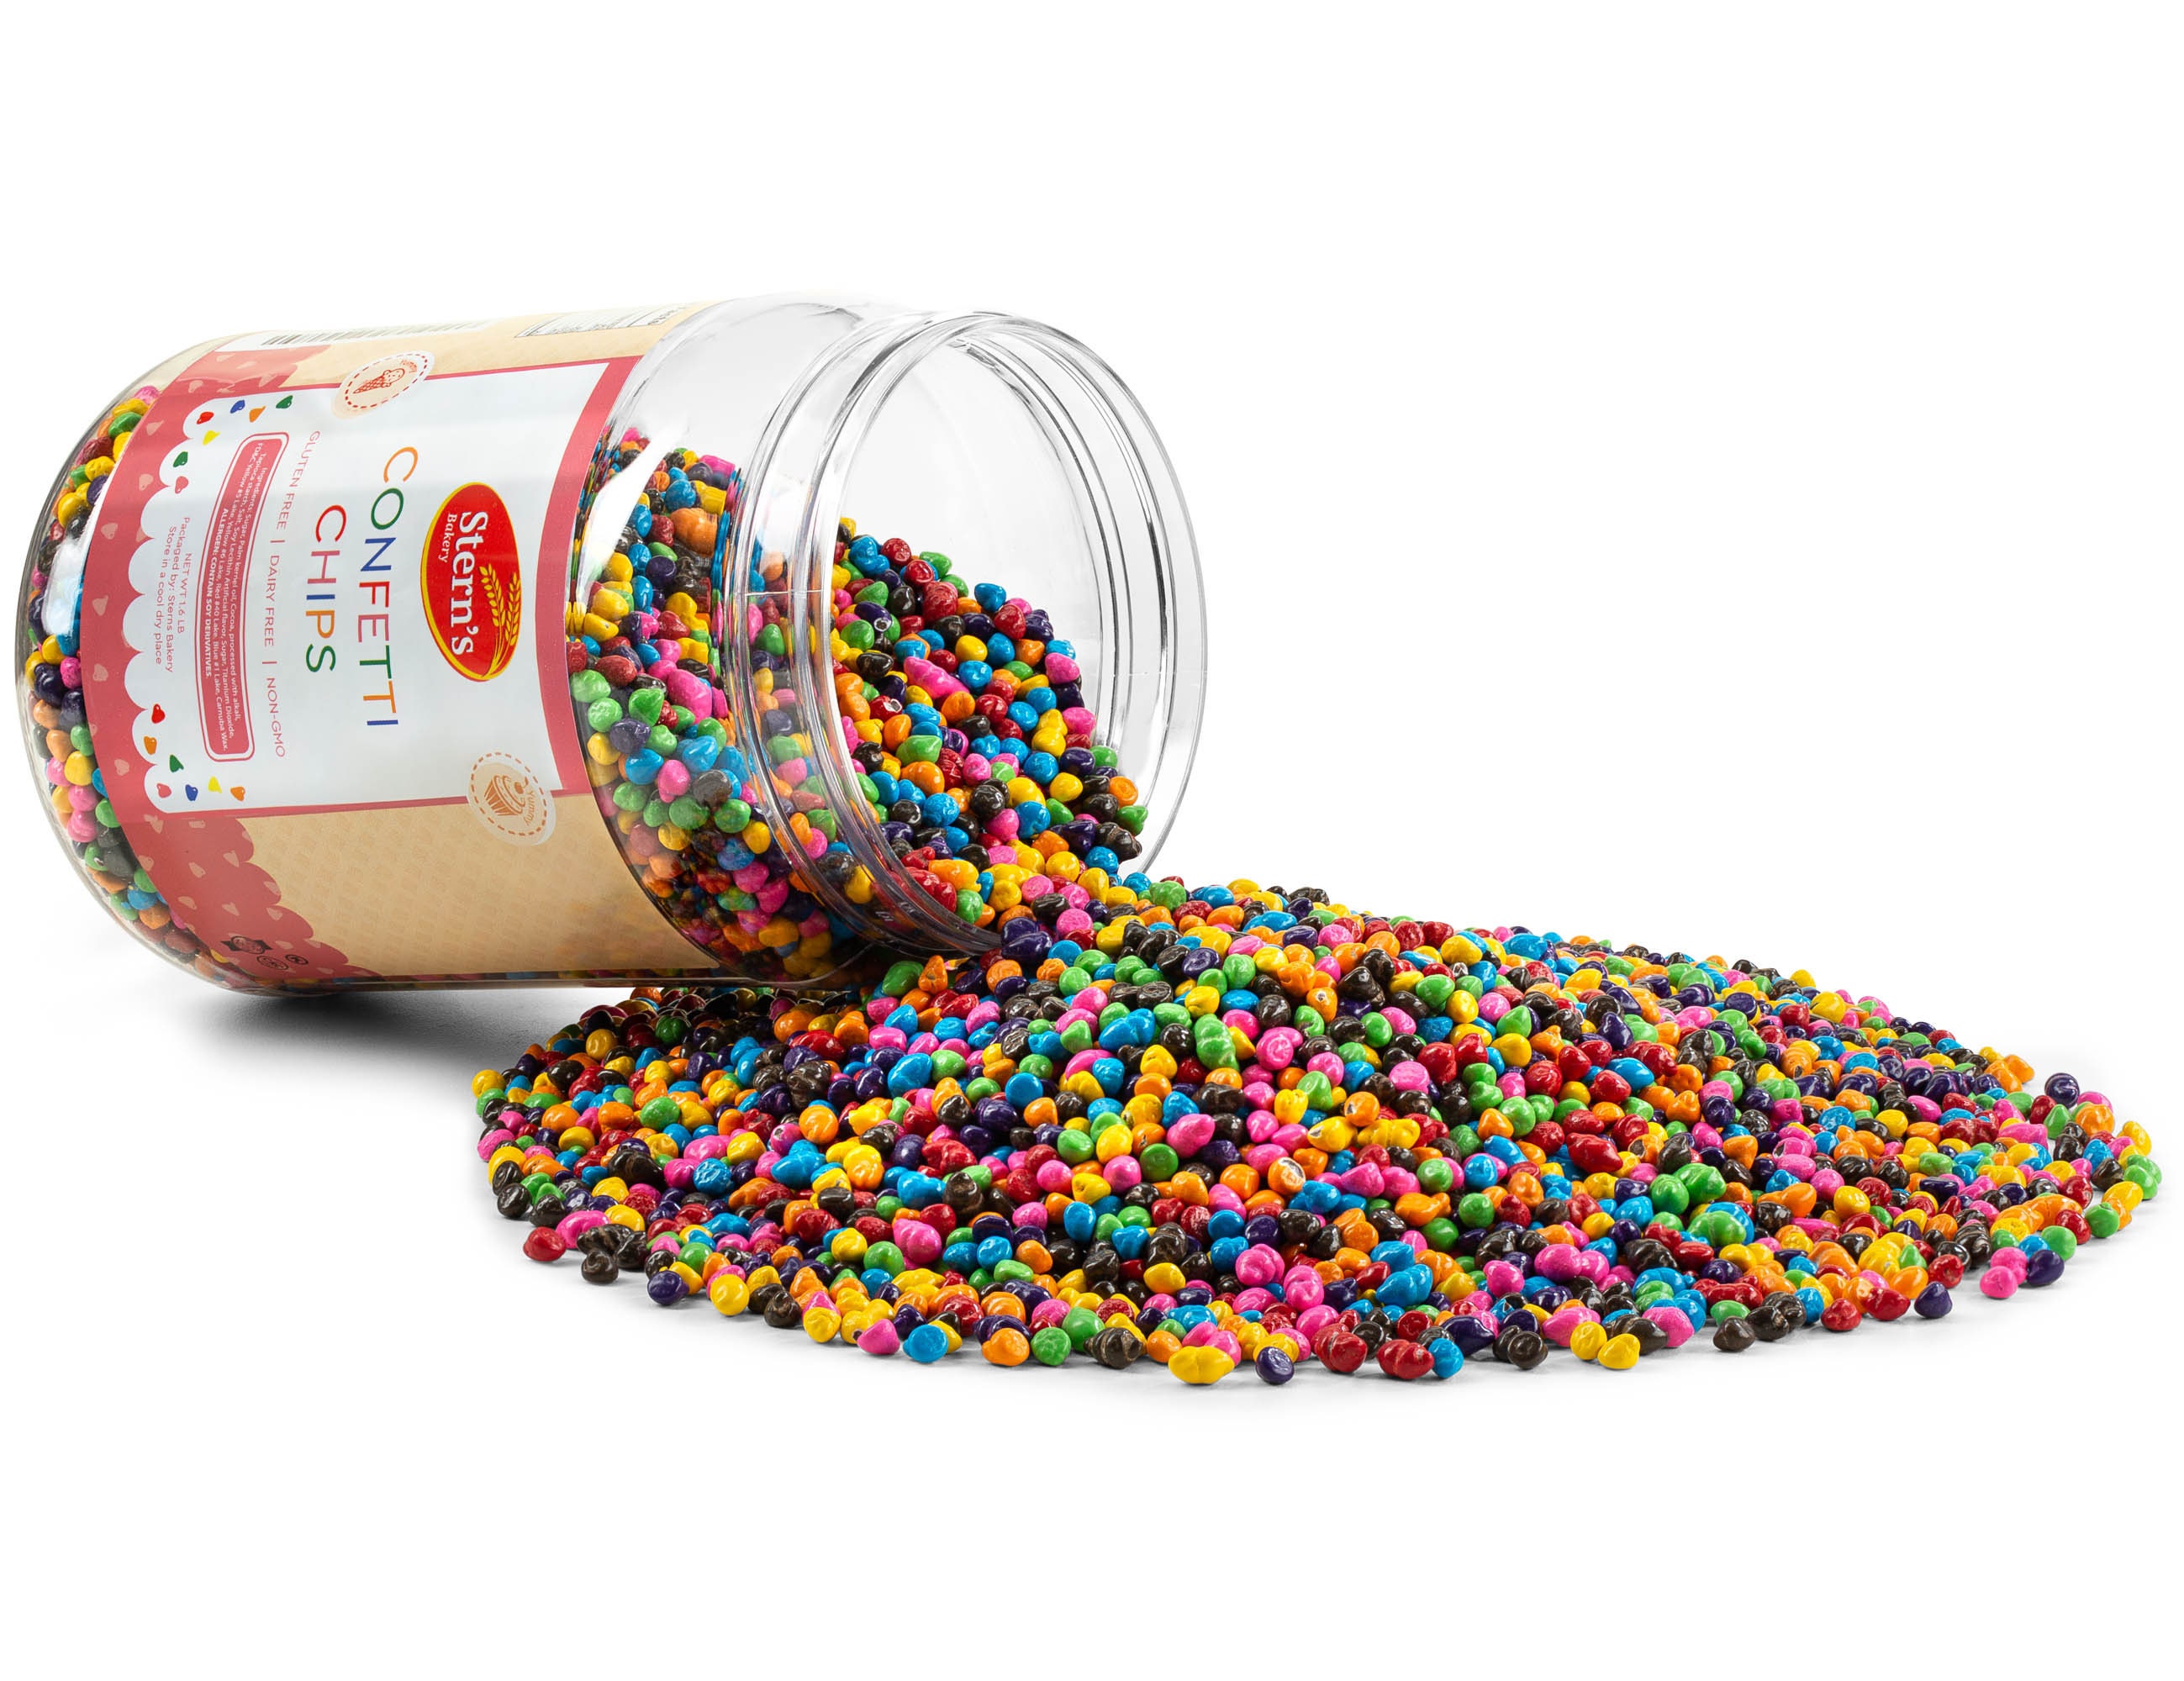 100% NATURAL Chocolate Sprinkles Jimmies - No Artificial Dyes - Gluten  Free, Vegan, Lactose Free, Bulk- 1.6 Pounds